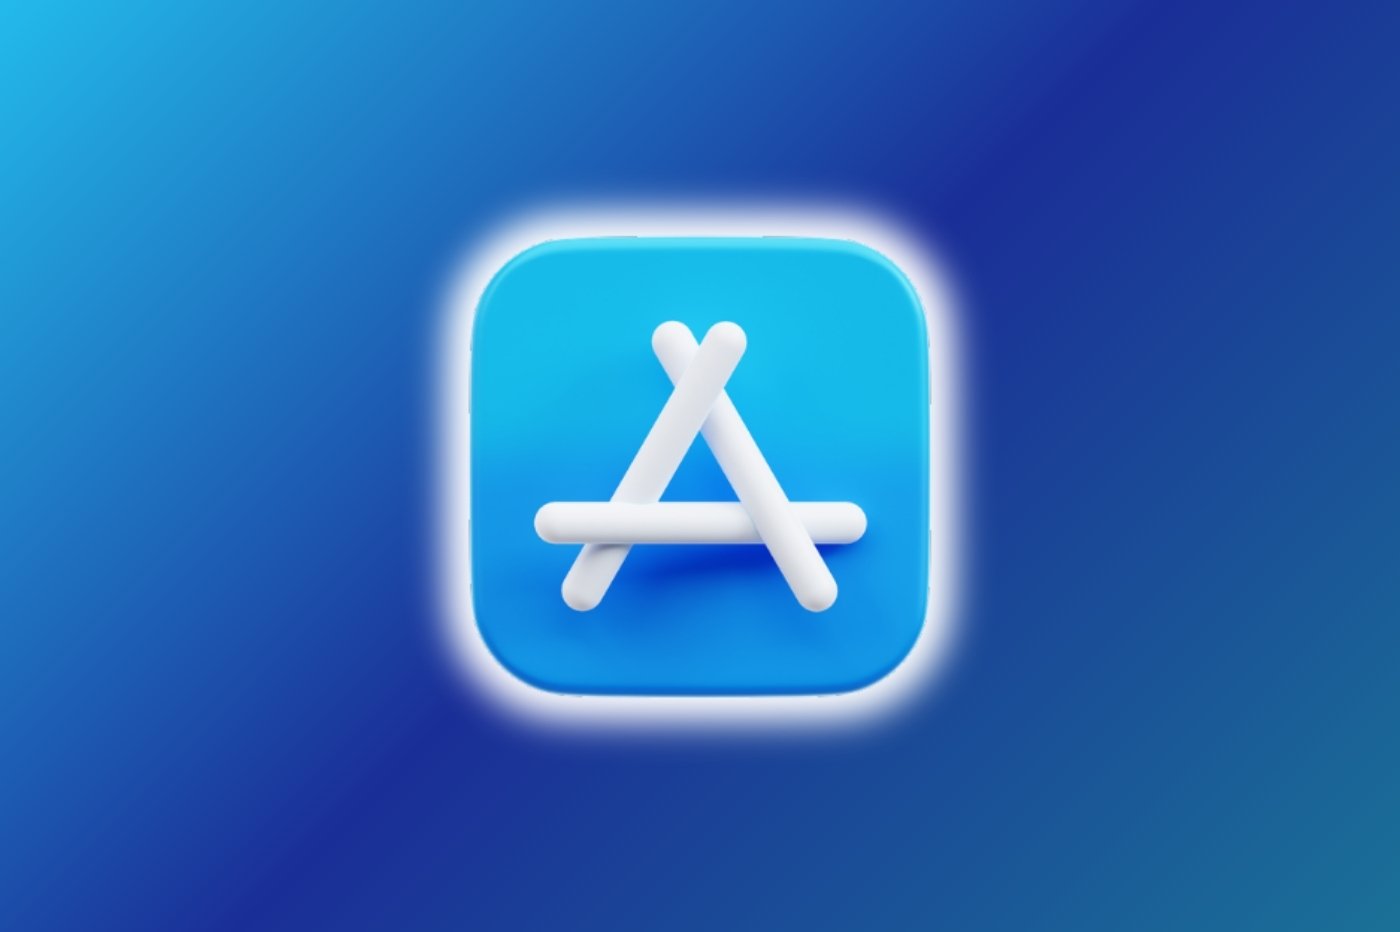 App store by iphon.fr